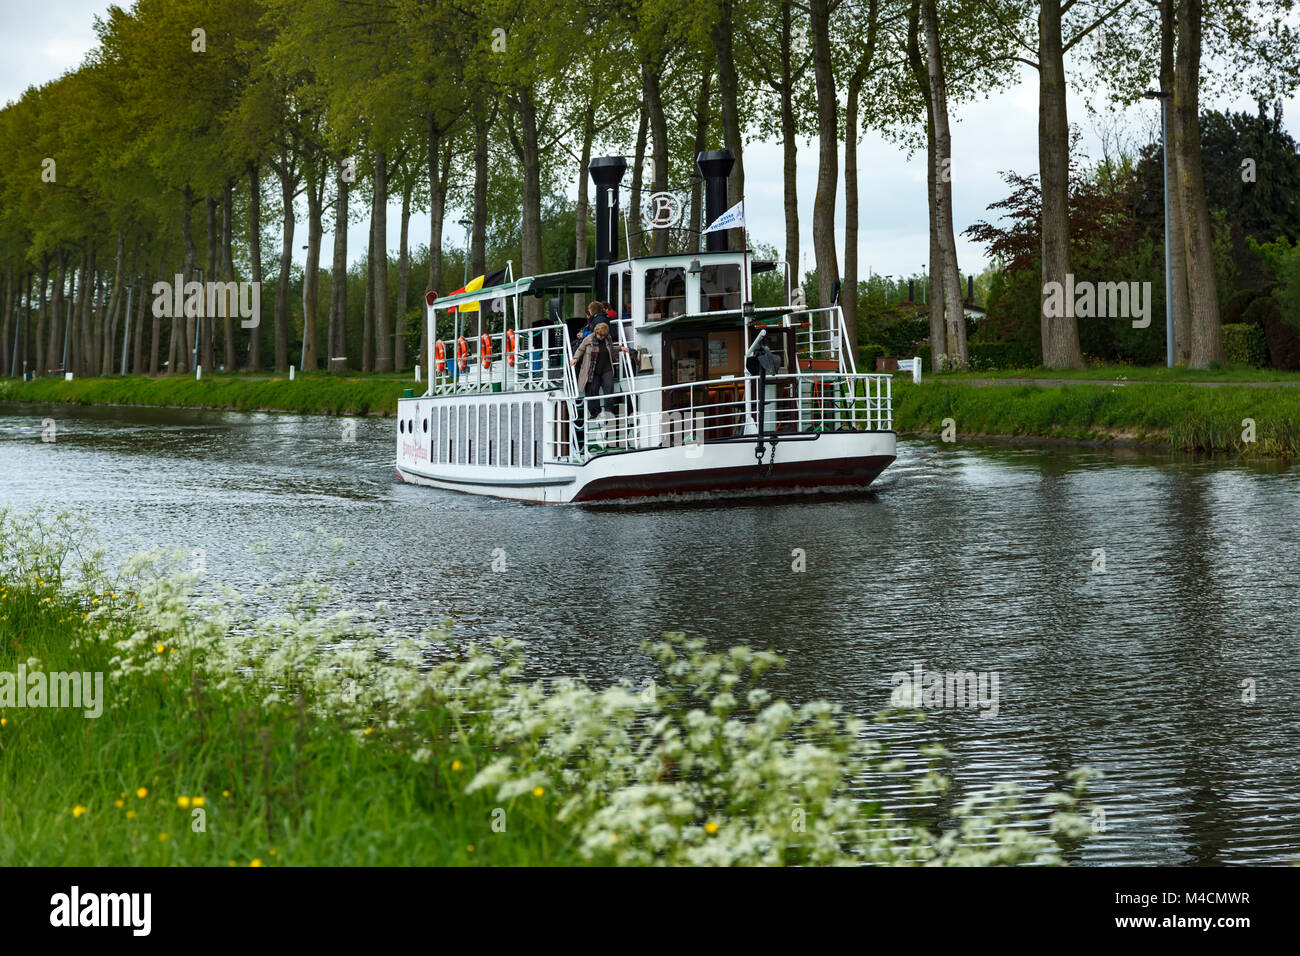 Paddle boat on Damme Canal, Belgium Stock Photo